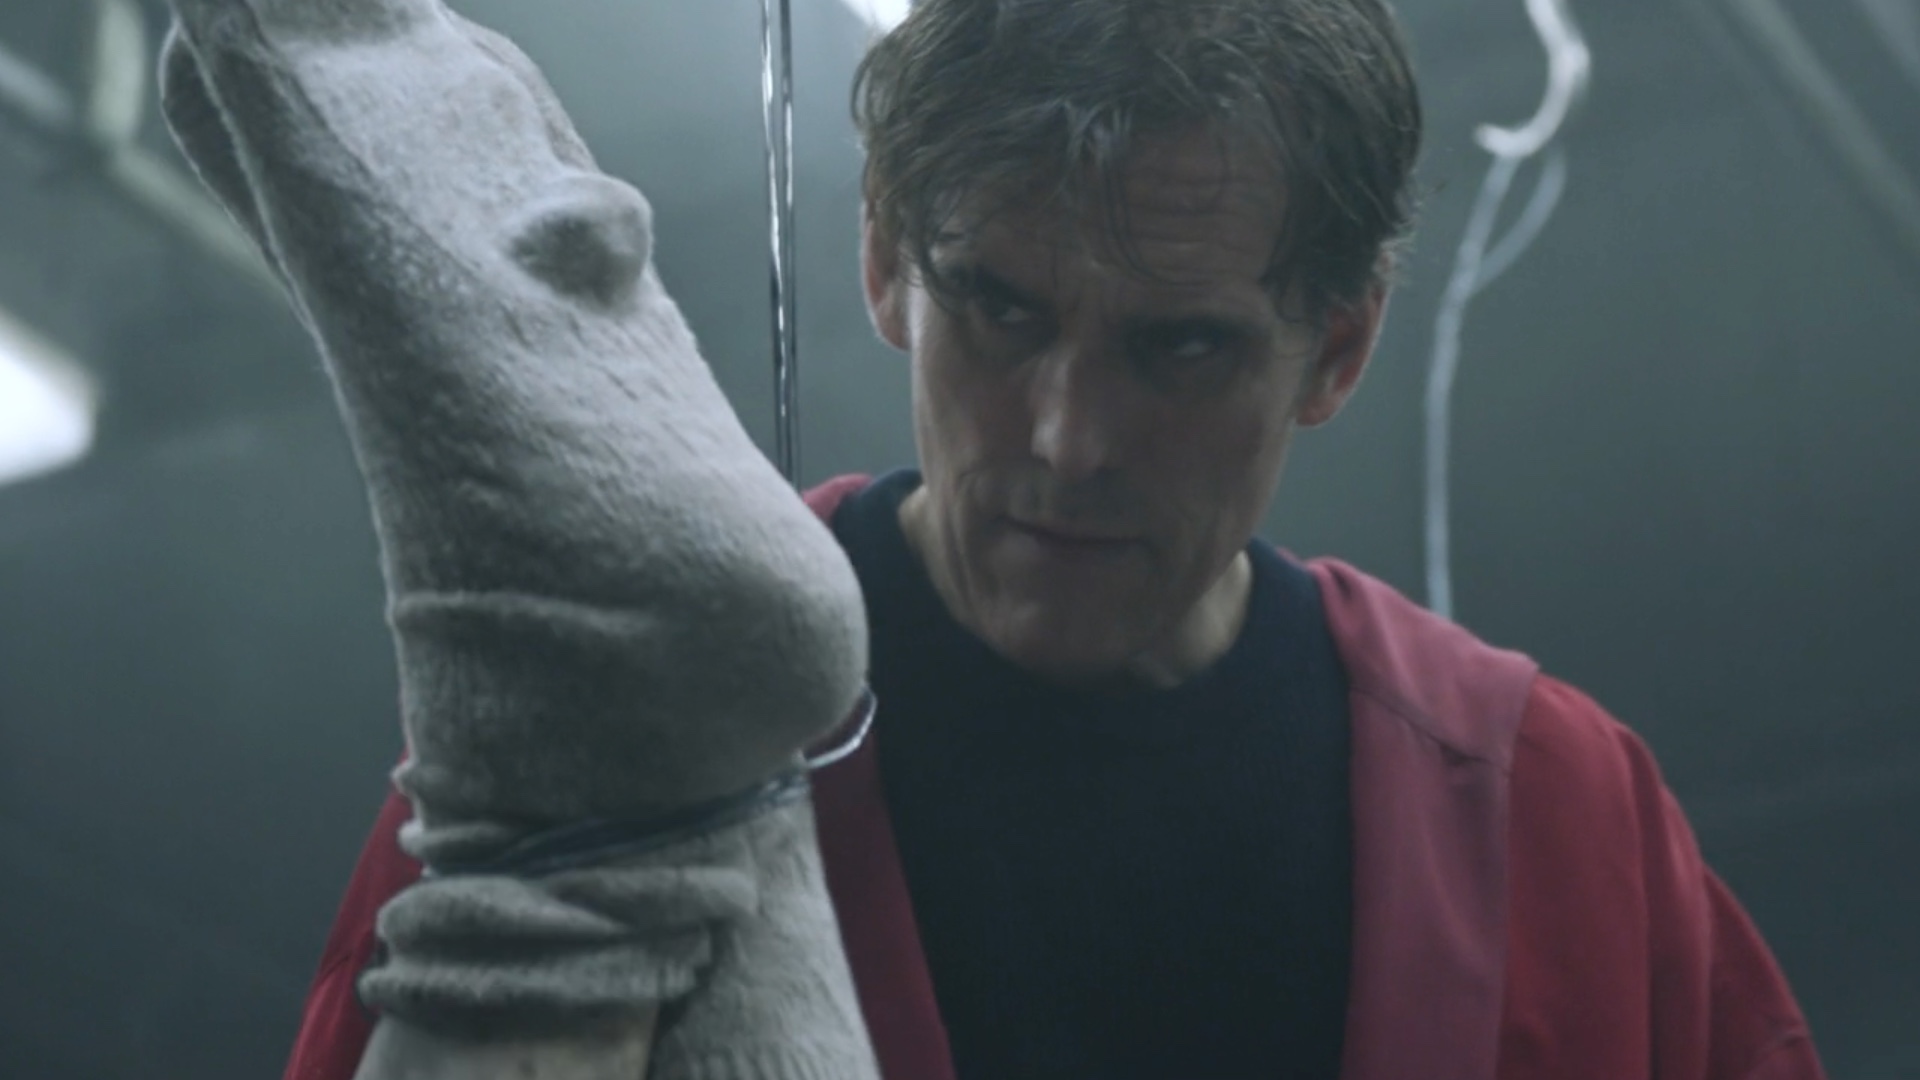 boom reviews The House That Jack Built